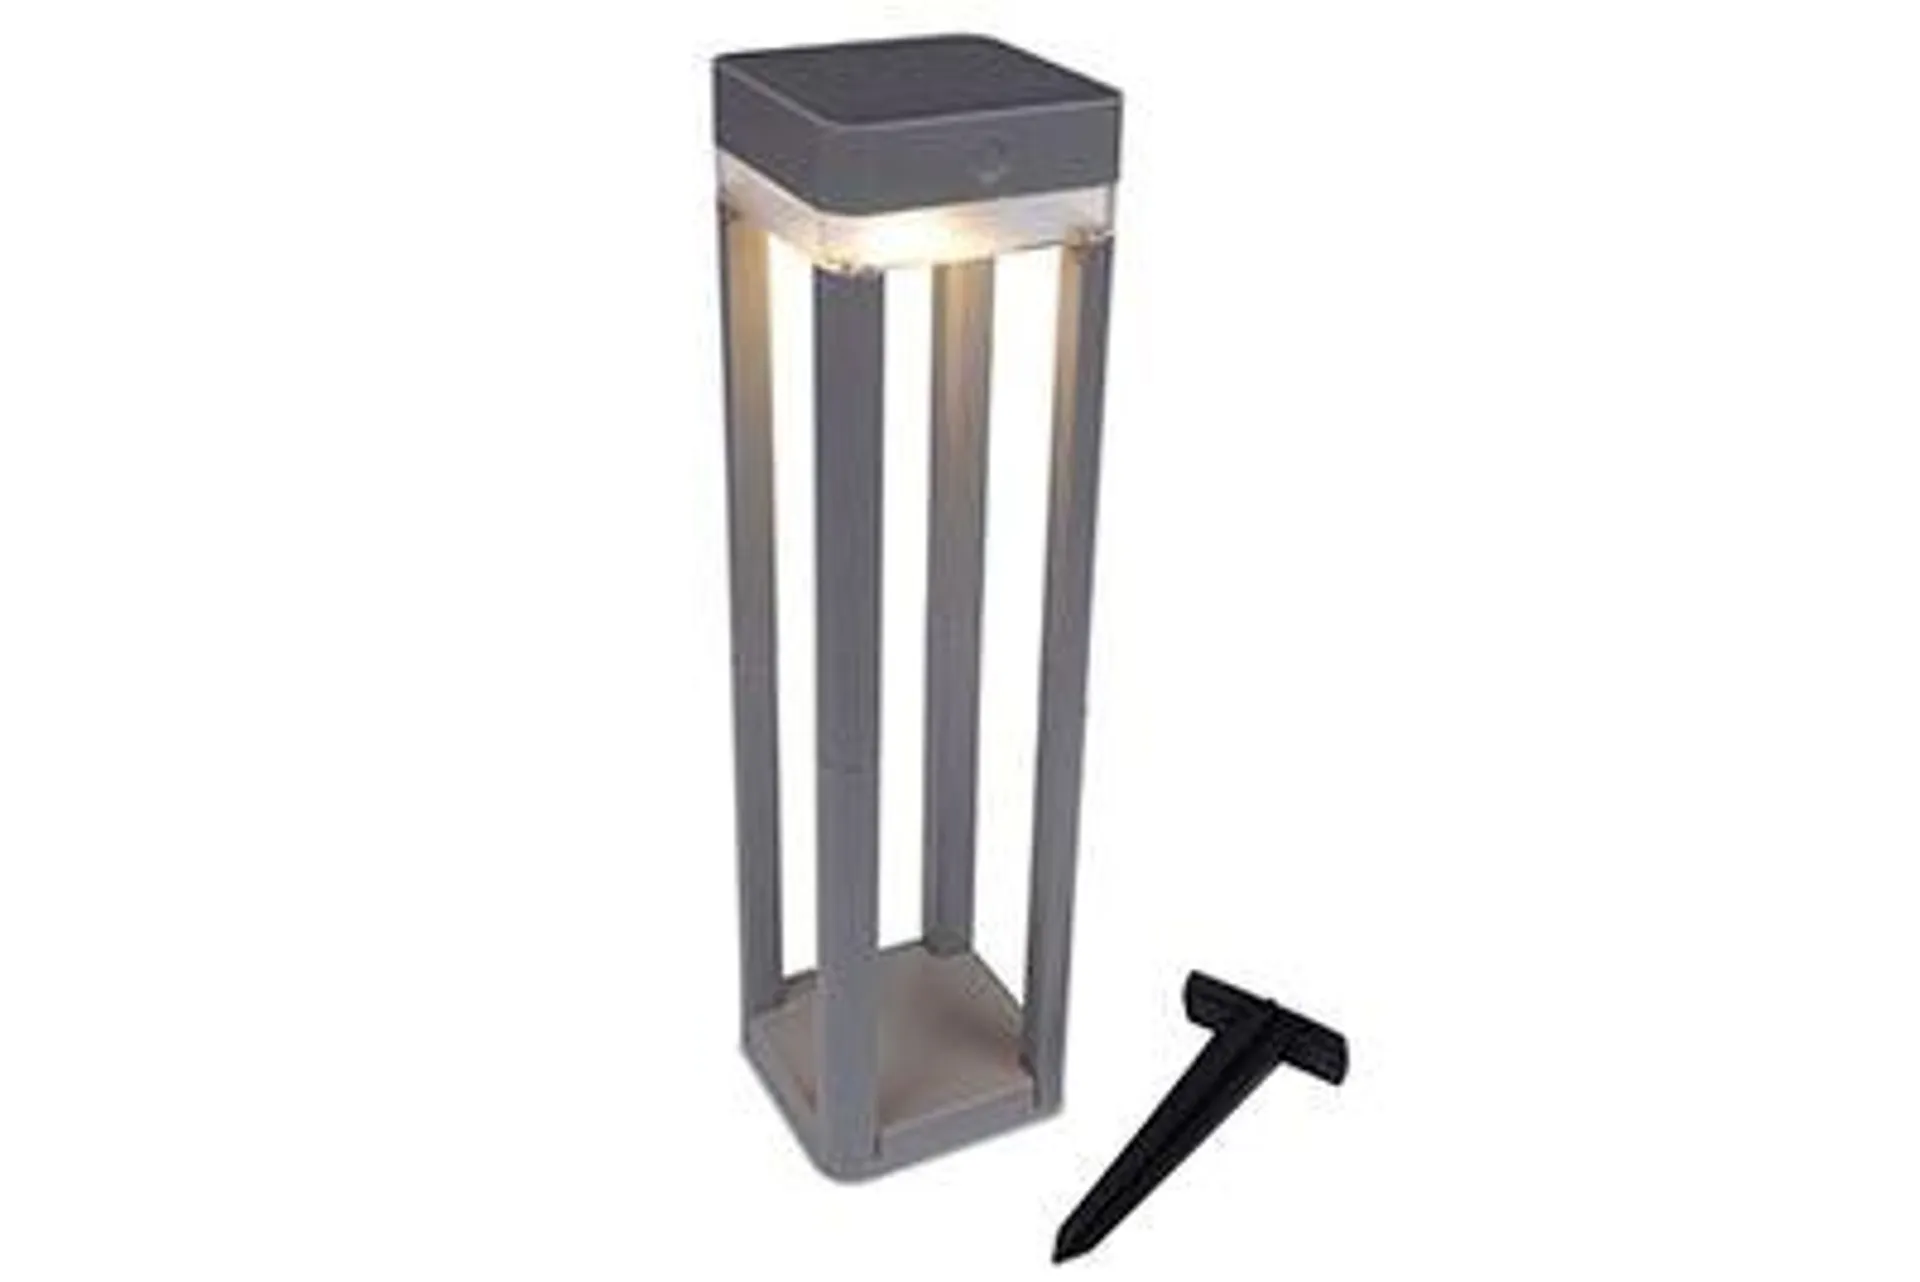 Table cube solar draagbare tuinpaal zilver grijs led 1w